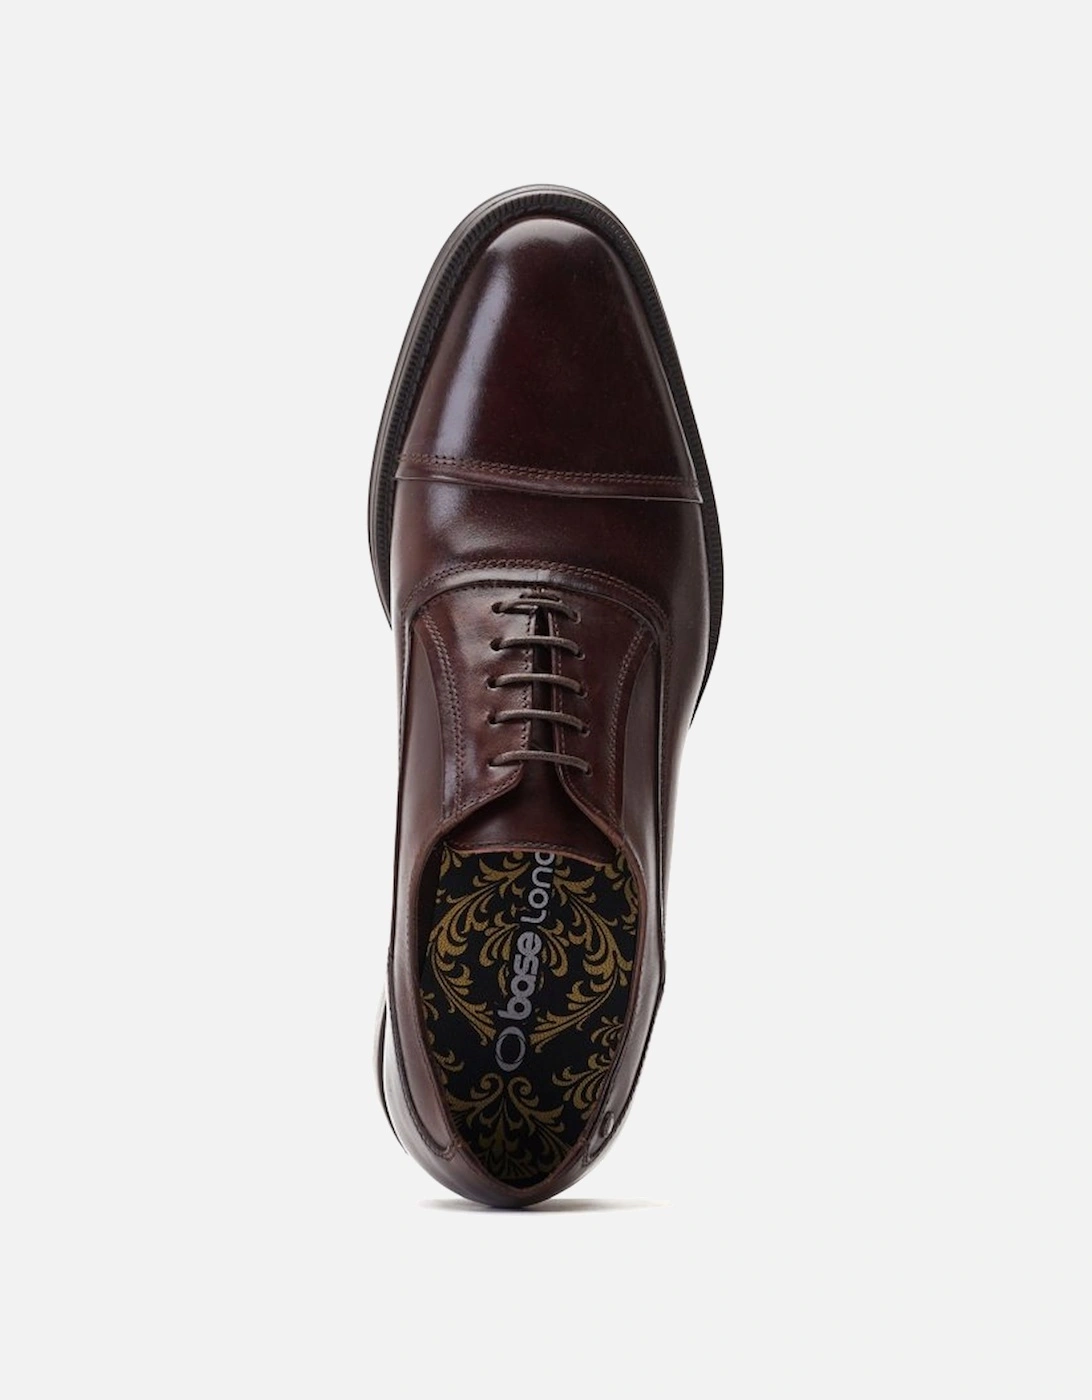 Wilson Waxy Mens Oxford Shoes